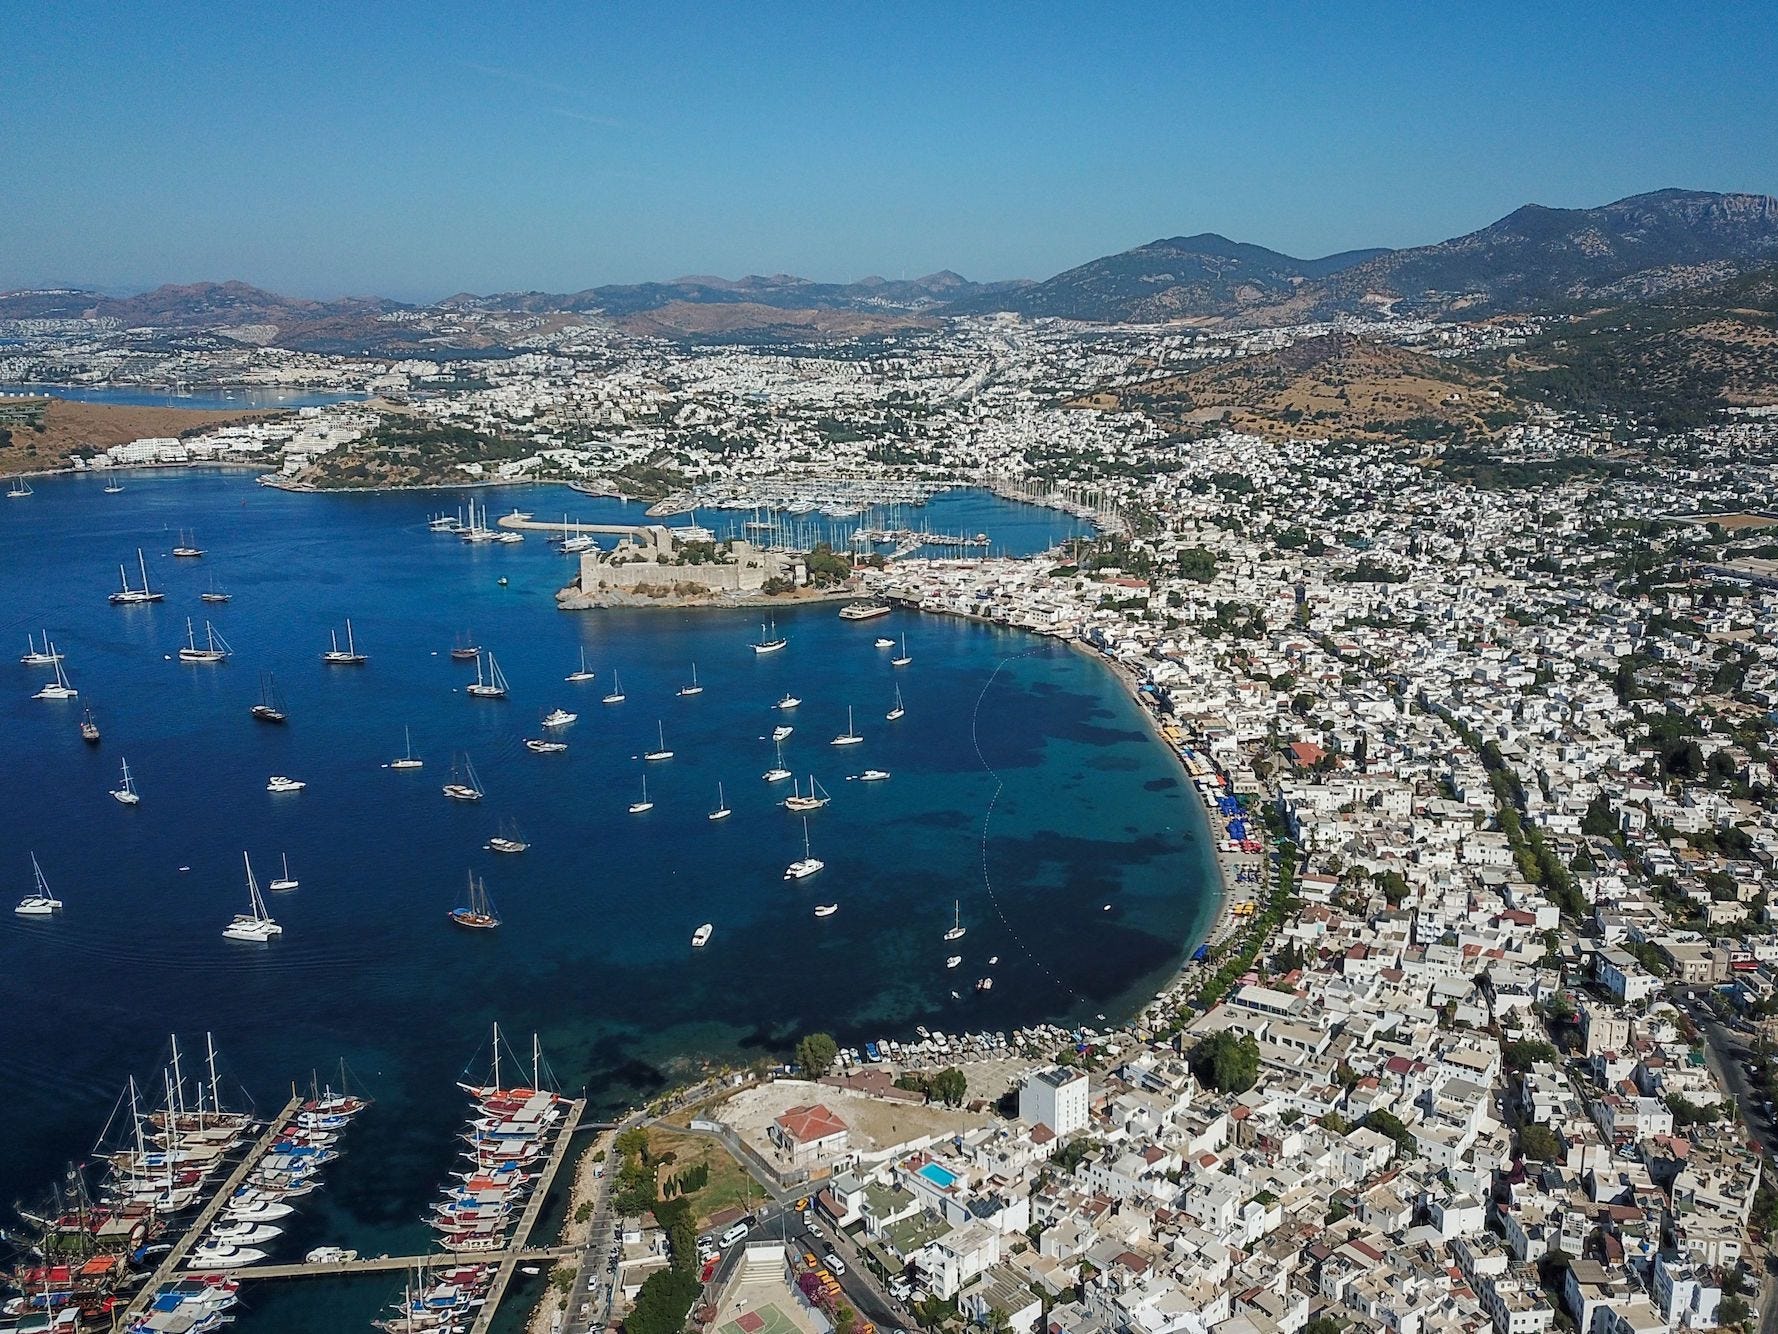 <p>Located on the Turkish Riviera, Bodrum has white-sand beaches and a Mediterranean flair. Weather is mostly <a href="https://www.dailysabah.com/life/why-bodrum-is-the-best-place-to-be-in-winter/news" rel="noopener nofollow sponsored">mild year-round</a>, with <a href="https://weatherspark.com/y/94296/Average-Weather-in-Bodrum-Turkey-Year-Round" rel="nofollow noopener sponsored">spring</a> being the most temperate.</p><p>For about $49 a night, according to <a href="https://affiliate.insider.com?h=dafb1d975c9ce05226e61b3ab683fb5cead2b7faf66c0fc083c615fc3d011490&platform=msn_reviews&postID=642ade21ba755654617ced15&site=in&u=https%3A%2F%2Fwww.booking.com%2Fhotel%2Ftr%2Foscar-mugla.html%3Faid%3D356980%26label%3Dgog235jc-1DCAso5AFCC29zY2FyLW11Z2xhSDNYA2inAogBAZgBMbgBB8gBDNgBA-gBAfgBAogCAagCA7gC3-7AoQbAAgHSAiQzMWEyNzFmNi05NWJlLTQ5YWYtYjI4Ny02MDU5ZDAzNjJkZjnYAgTgAgE%26sid%3Dd4a030a9a8b25c7b2a1a6daaf40b1db6%26sb%3D1%26src%3Dhotel%26src_elem%3Dsb%26error_url%3Dhttps%253A%252F%252Fwww.booking.com%252Fhotel%252Ftr%252Foscar-mugla.html%253Faid%253D356980%2526label%253Dgog235jc-1DCAso5AFCC29zY2FyLW11Z2xhSDNYA2inAogBAZgBMbgBB8gBDNgBA-gBAfgBAogCAagCA7gC3-7AoQbAAgHSAiQzMWEyNzFmNi05NWJlLTQ5YWYtYjI4Ny02MDU5ZDAzNjJkZjnYAgTgAgE%2526sid%253Dd4a030a9a8b25c7b2a1a6daaf40b1db6%2526dist%253D0%253Broom1%253DA%25252CA%253Bsb_price_type%253Dtotal%253Btype%253Dtotal%2526%2526%26highlighted_hotels%3D1287028%26origin%3Dhp%26hp_avform%3D1%26do_availability_check%3Don%26stay_on_hp%3D1%26checkin_year%3D2023%26checkin_month%3D4%26checkin_monthday%3D8%26checkout_year%3D2023%26checkout_month%3D4%26checkout_monthday%3D11%26group_adults%3D1%26group_children%3D0%26no_rooms%3D1%26b_h4u_keep_filters%3D%26from_sf%3D1%23availability_target&utm_source=msn_reviews" rel="nofollow noopener sponsored">Booking.com</a>, you can stay at the Bodrum Oscar Hotel, which includes breakfast and free parking. The property has a pool and is a short walk from <a href="https://affiliate.insider.com?h=9e3059a7babf67b6499e2de50424ef47203c28dc86ed6c4deab42391c1c849b5&platform=msn_reviews&postID=642ade21ba755654617ced15&site=in&u=https%3A%2F%2Fwww.tripadvisor.com%2FAttraction_Review-g298663-d12866484-Reviews-Torba_Plaji-Torba_Bodrum_District_Mugla_Province_Turkish_Aegean_Coast.html&utm_source=msn_reviews" rel="noopener nofollow sponsored">Torba Beach</a>.</p><p>In terms of Bodrum's must-sees, you can visit the <a href="https://affiliate.insider.com?h=e77975349042fbcc2587693cc6255725b057a272a3a3e92484834ef1fc5998af&platform=msn_reviews&postID=642ade21ba755654617ced15&site=in&u=https%3A%2F%2Fwww.tripadvisor.com%2FAttraction_Review-g298658-d2177923-Reviews-Mausoleum_of_Halicarnassus-Bodrum_City_Bodrum_District_Mugla_Province_Turkish_Aeg.html&utm_source=msn_reviews" rel="noopener nofollow sponsored">Mausoleum at Halicarnassus</a>, an ancient tomb and archaeological site, which costs less than a dollar for entry, according to <a href="https://www.frommers.com/destinations/bodrum/attractions/mausoleum-of-halicarnassus" rel="noopener nofollow sponsored">Frommer's.</a> There's also <a href="https://whc.unesco.org/en/tentativelists/6121/" rel="noopener nofollow sponsored">Bodrum Castle</a>, a 15th-century fortress with a museum of ancient artifacts recovered from ocean excavations. Tickets cost about <a href="https://muze.gov.tr/muze-detay?distId=MRK&sectionId=BSA01" rel="noopener nofollow sponsored nofollow sponsored">$15 to visit the castle and museum.</a></p><p>As for a nature excursion, there's a <a href="https://excursiongo.com/tour/bodrum-pamukkale-tour/" rel="noopener nofollow sponsored">guided full-day tour</a> you can take to <a href="https://whc.unesco.org/en/list/485/" rel="noopener nofollow sponsored">Pamukkale</a>, a natural wonder and site of mineral springs that over centuries have built up eye-catching white travertines. The tour costs about $45 per person and includes hotel transfers and a buffet lunch. The tour also includes the ruins of the ancient city of Hierapolis, located in the same area.</p><p>And if you want to try your hand at Aegean Turkish cuisine, you can take a <a href="https://affiliate.insider.com?h=b5af408ce2998fc7cd38a230e1c1ce664ef99c1aa4d5328247e70696433bf34a&platform=msn_reviews&postID=642ade21ba755654617ced15&site=in&u=https%3A%2F%2Fwww.tripadvisor.com%2FAttractionProductReview-g298658-d23802104-Farmers_Market_visit_Turkish_Cooking_Class-Bodrum_City_Bodrum_District_Mugla_Provi.html&utm_source=msn_reviews" rel="noopener nofollow sponsored">cooking class</a> for about $120 a person, which includes a trip to the local farmers' market to pick up your supplies. The meal, which you'll help cook, includes traditional dishes of four cold starters, an entrée, main course, and dessert.</p>